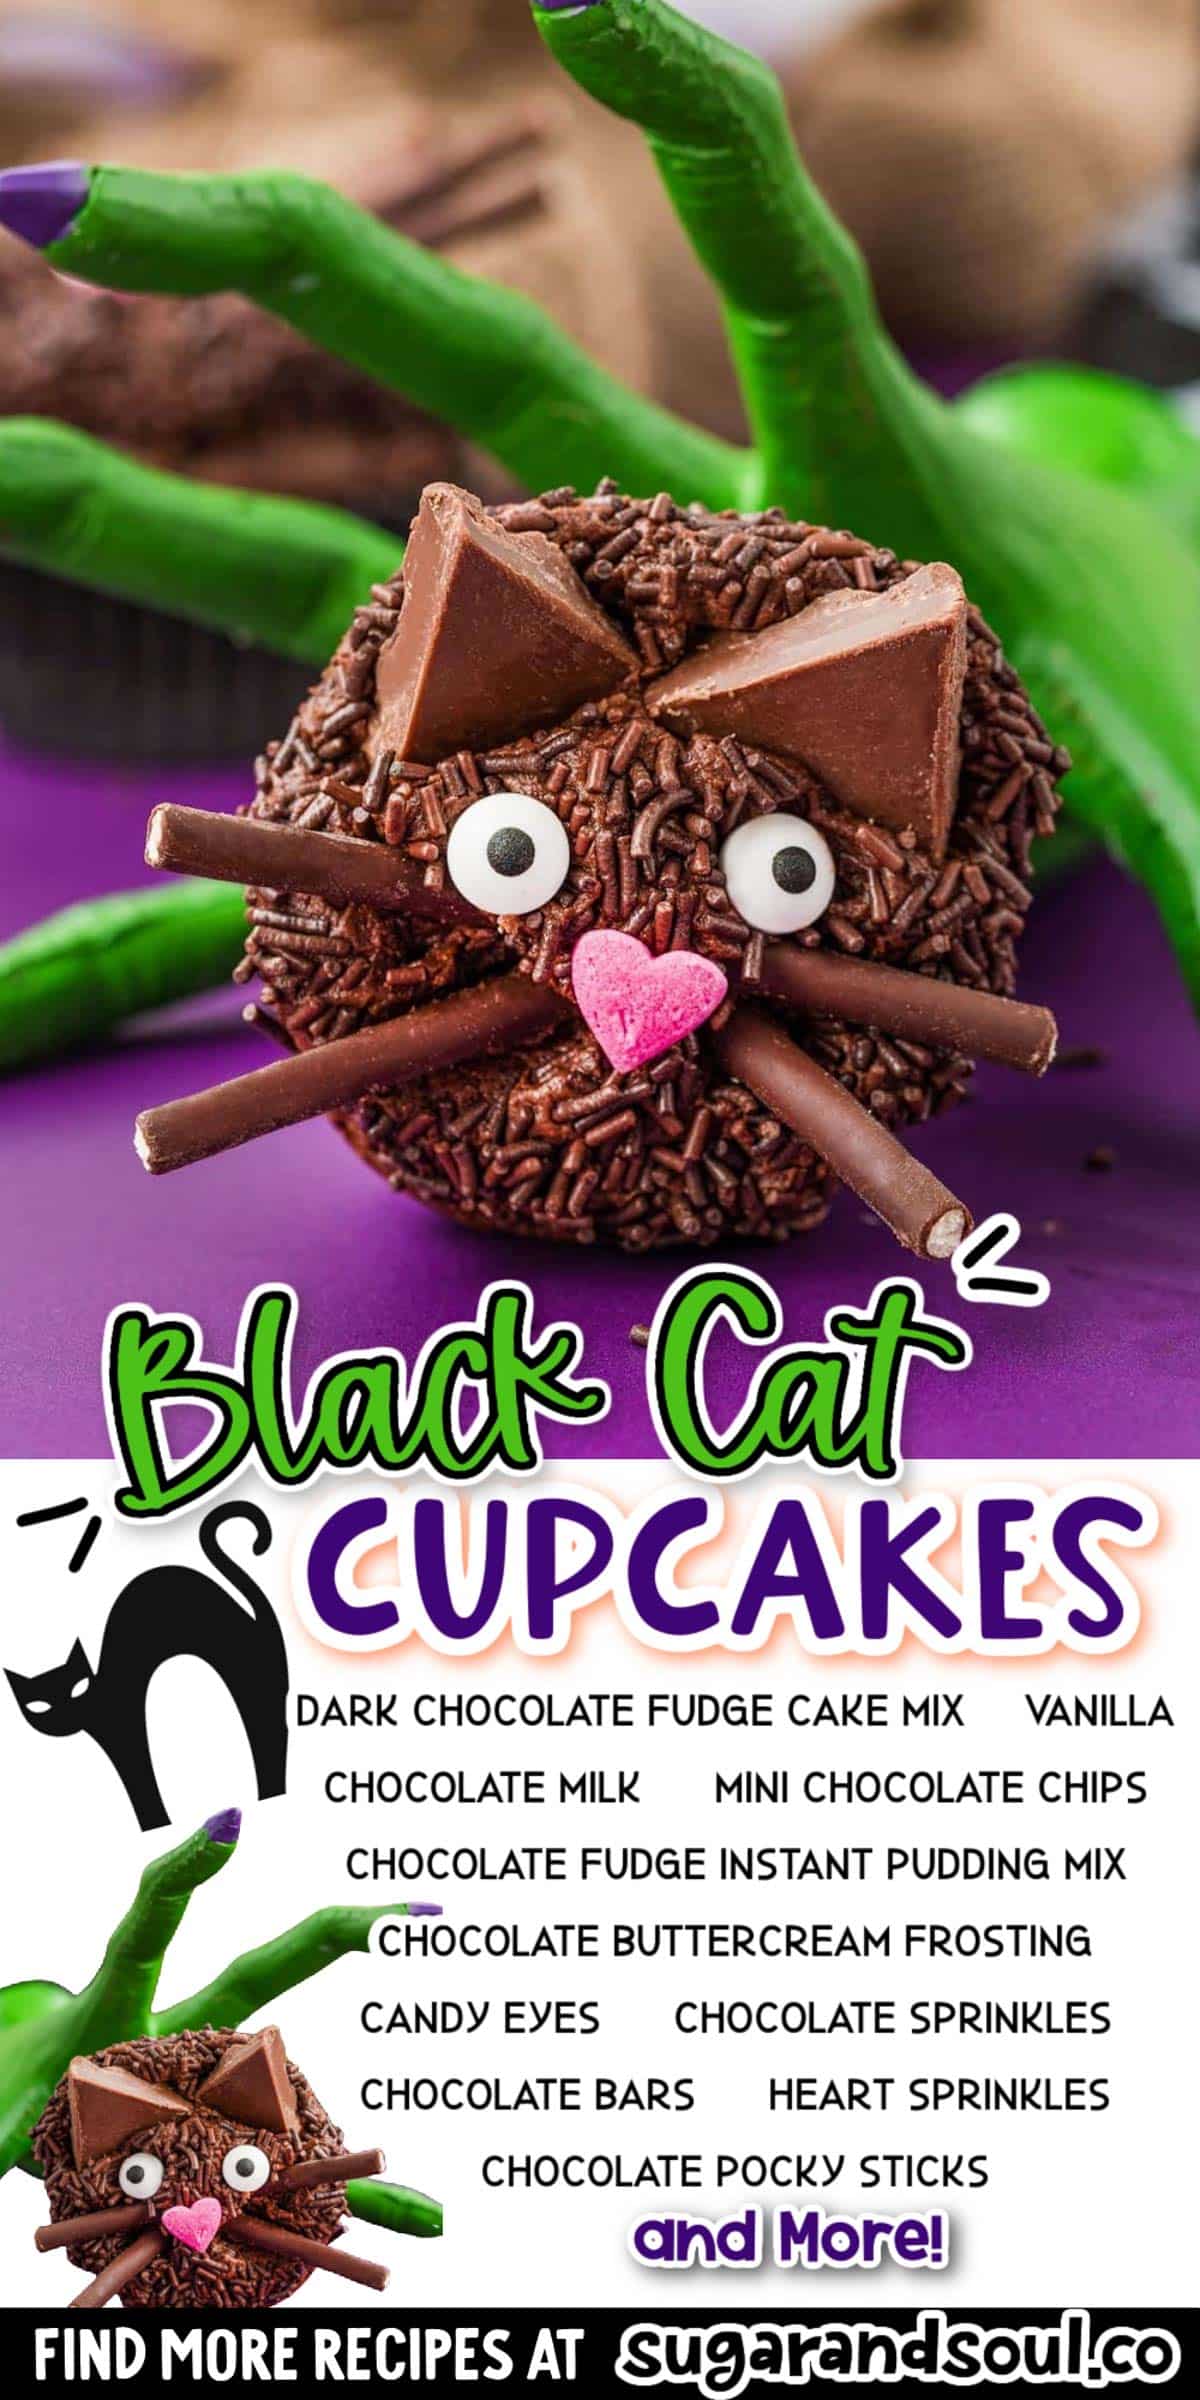 These Black Cat Cupcakes are a rich, chocolaty Halloween treat that's perfect for parties! Kids will have a blast helping you make each cat face using edible decorations! via @sugarandsoulco